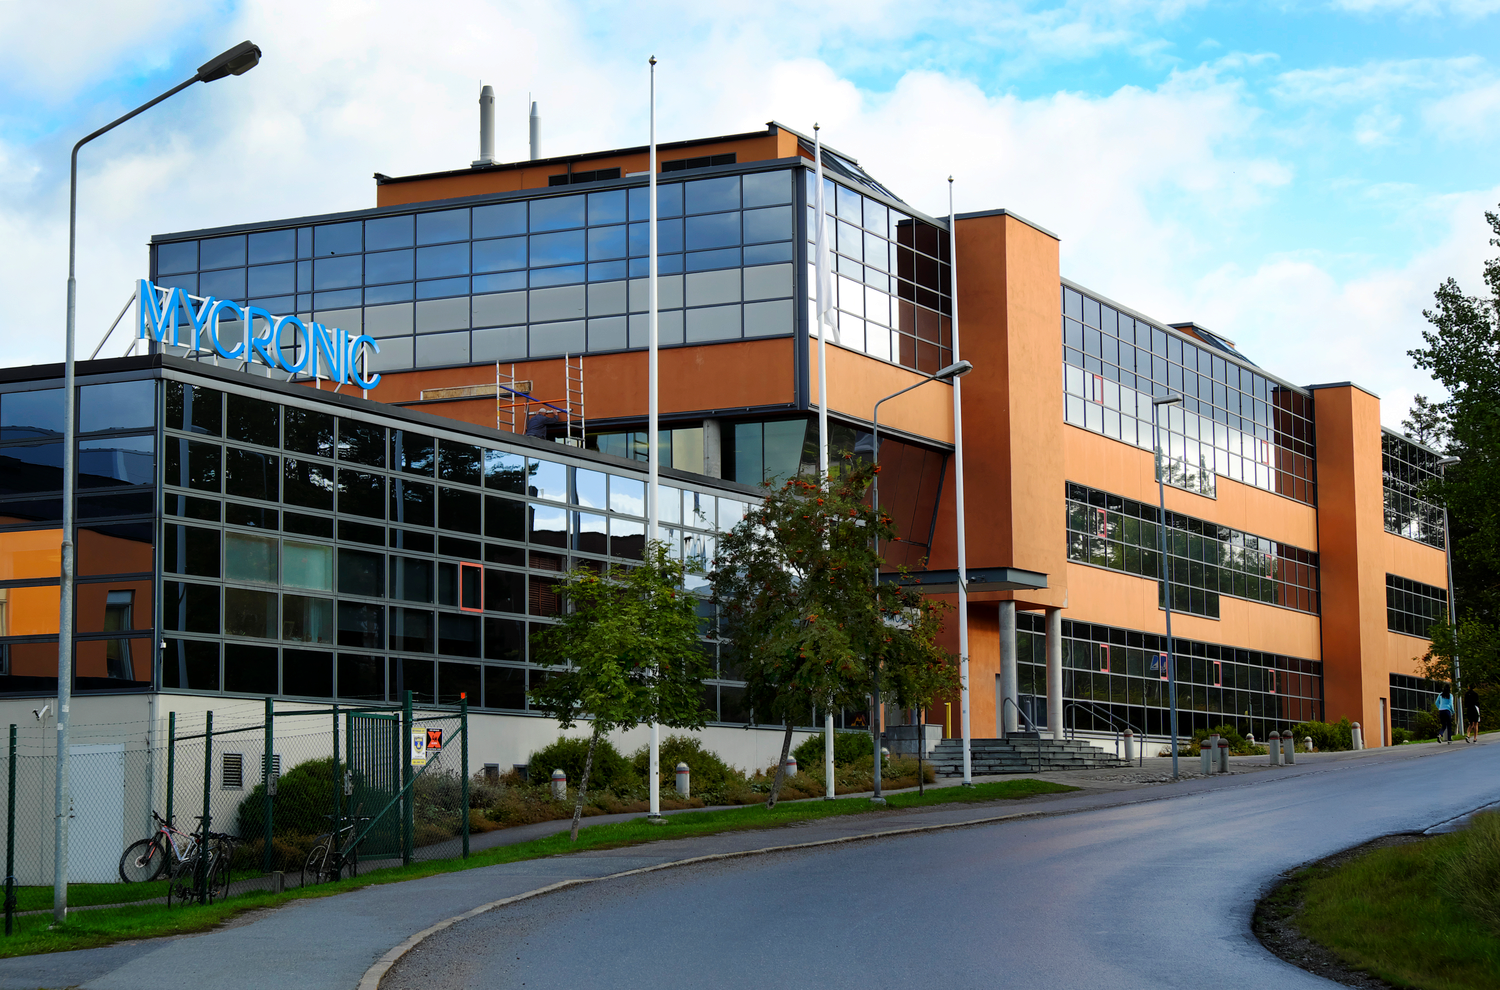 Facts about Mycronic: The head quarter in Täby exterior view